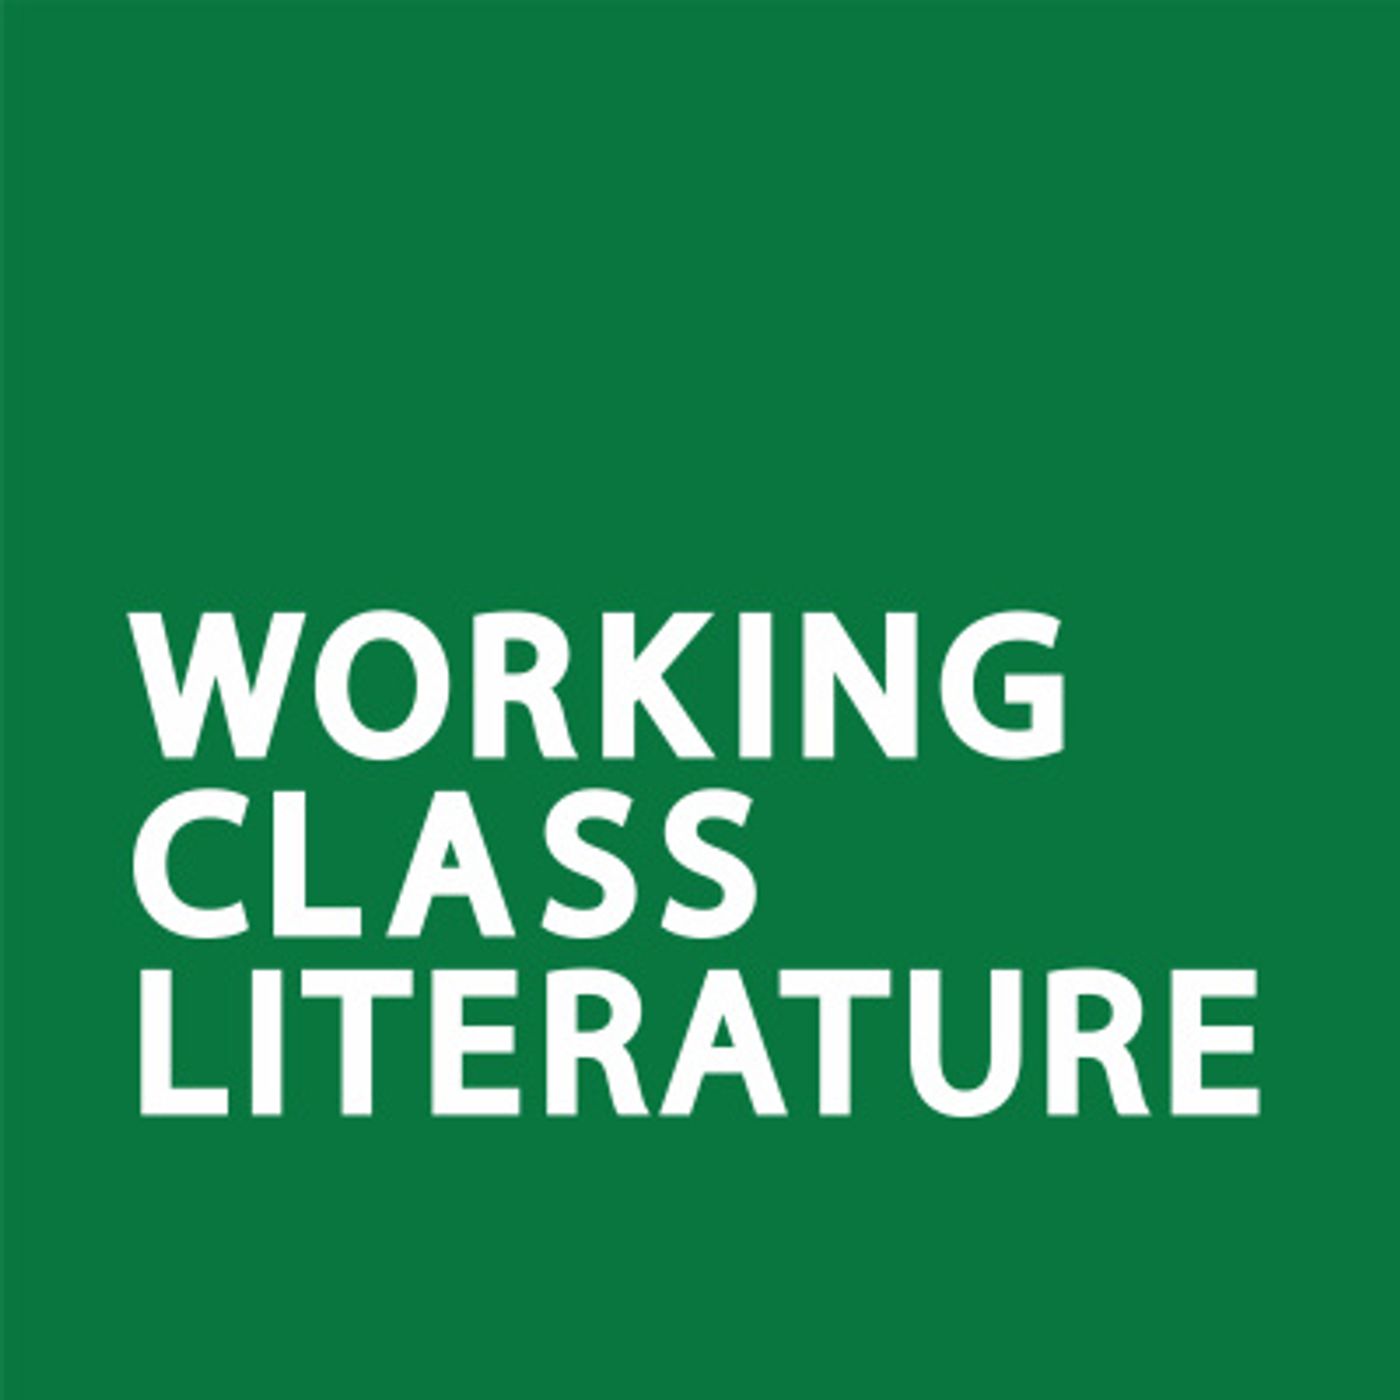 Introduction to Working Class Literature